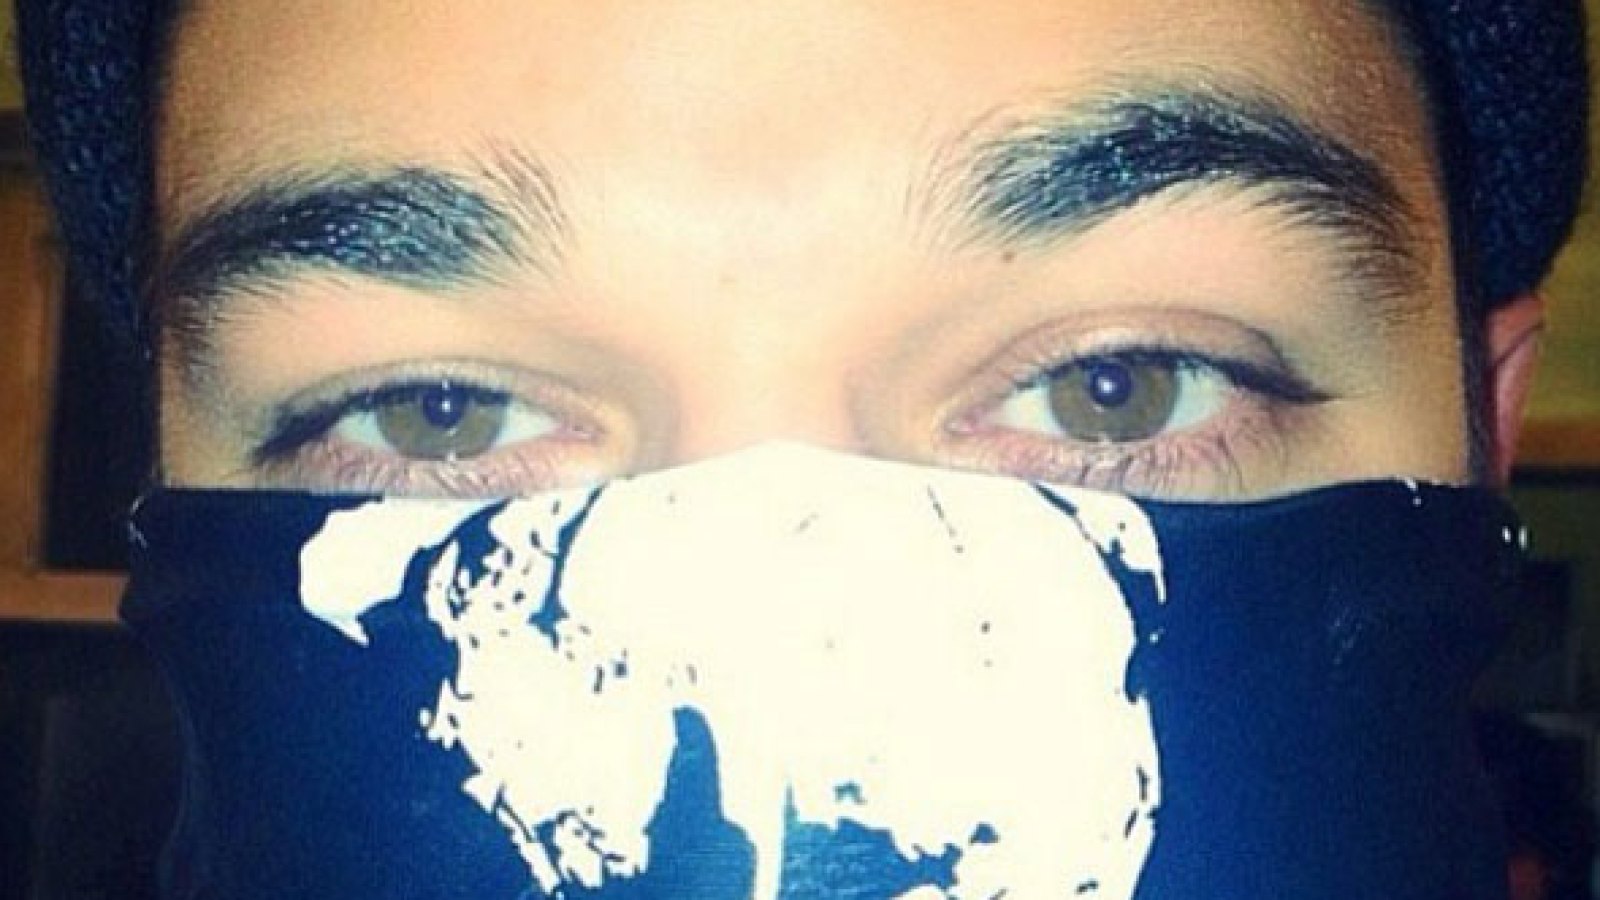 Rob Kardashian shared a half-covered selfie picture